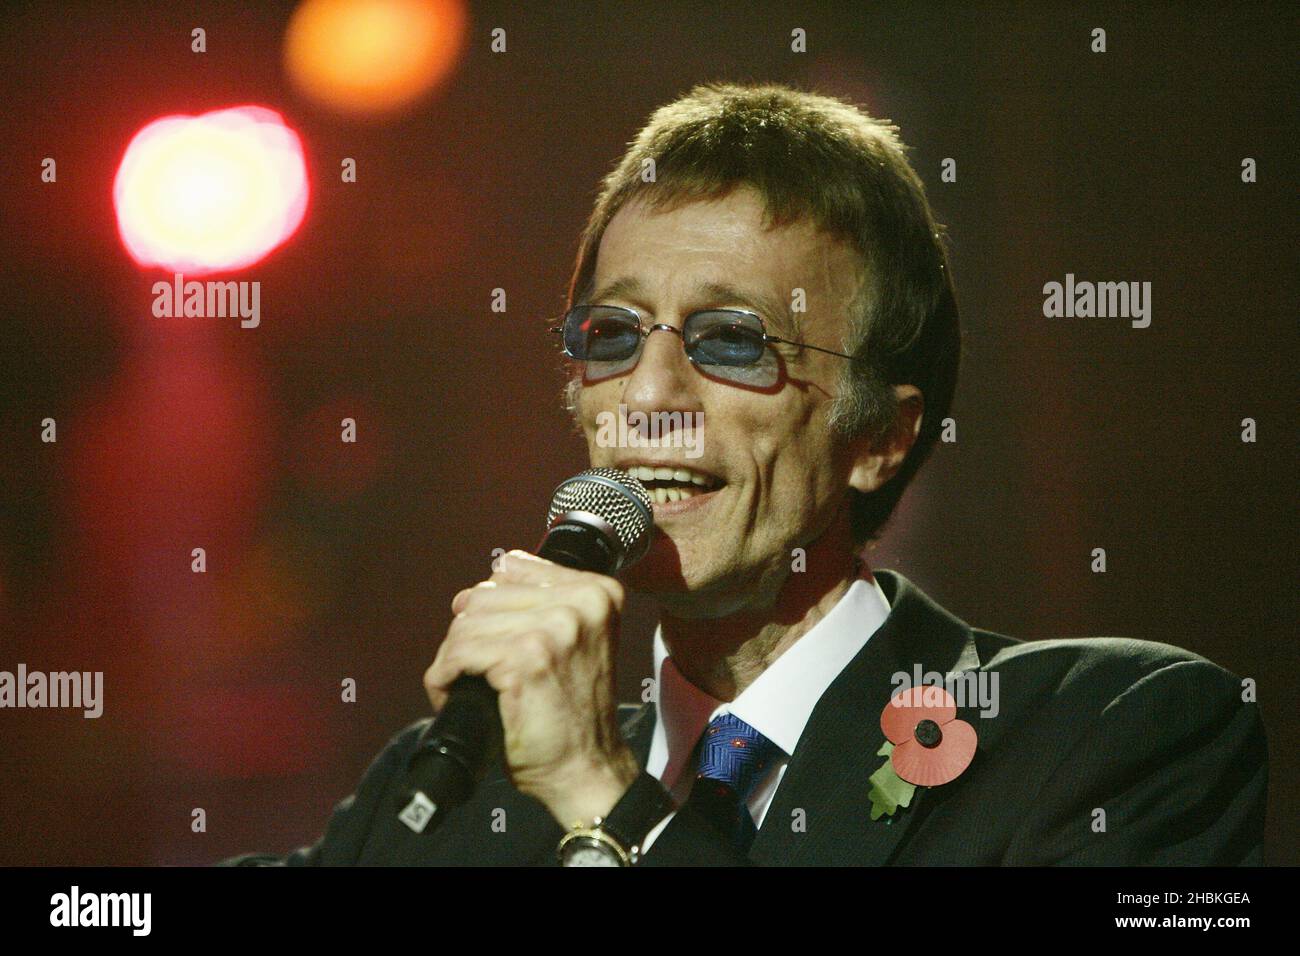 Robin Gibb performs at the BBC Electric Proms 2008 - Saturday Night Fever at the Roundhouse, Chalk Farm. Stock Photo